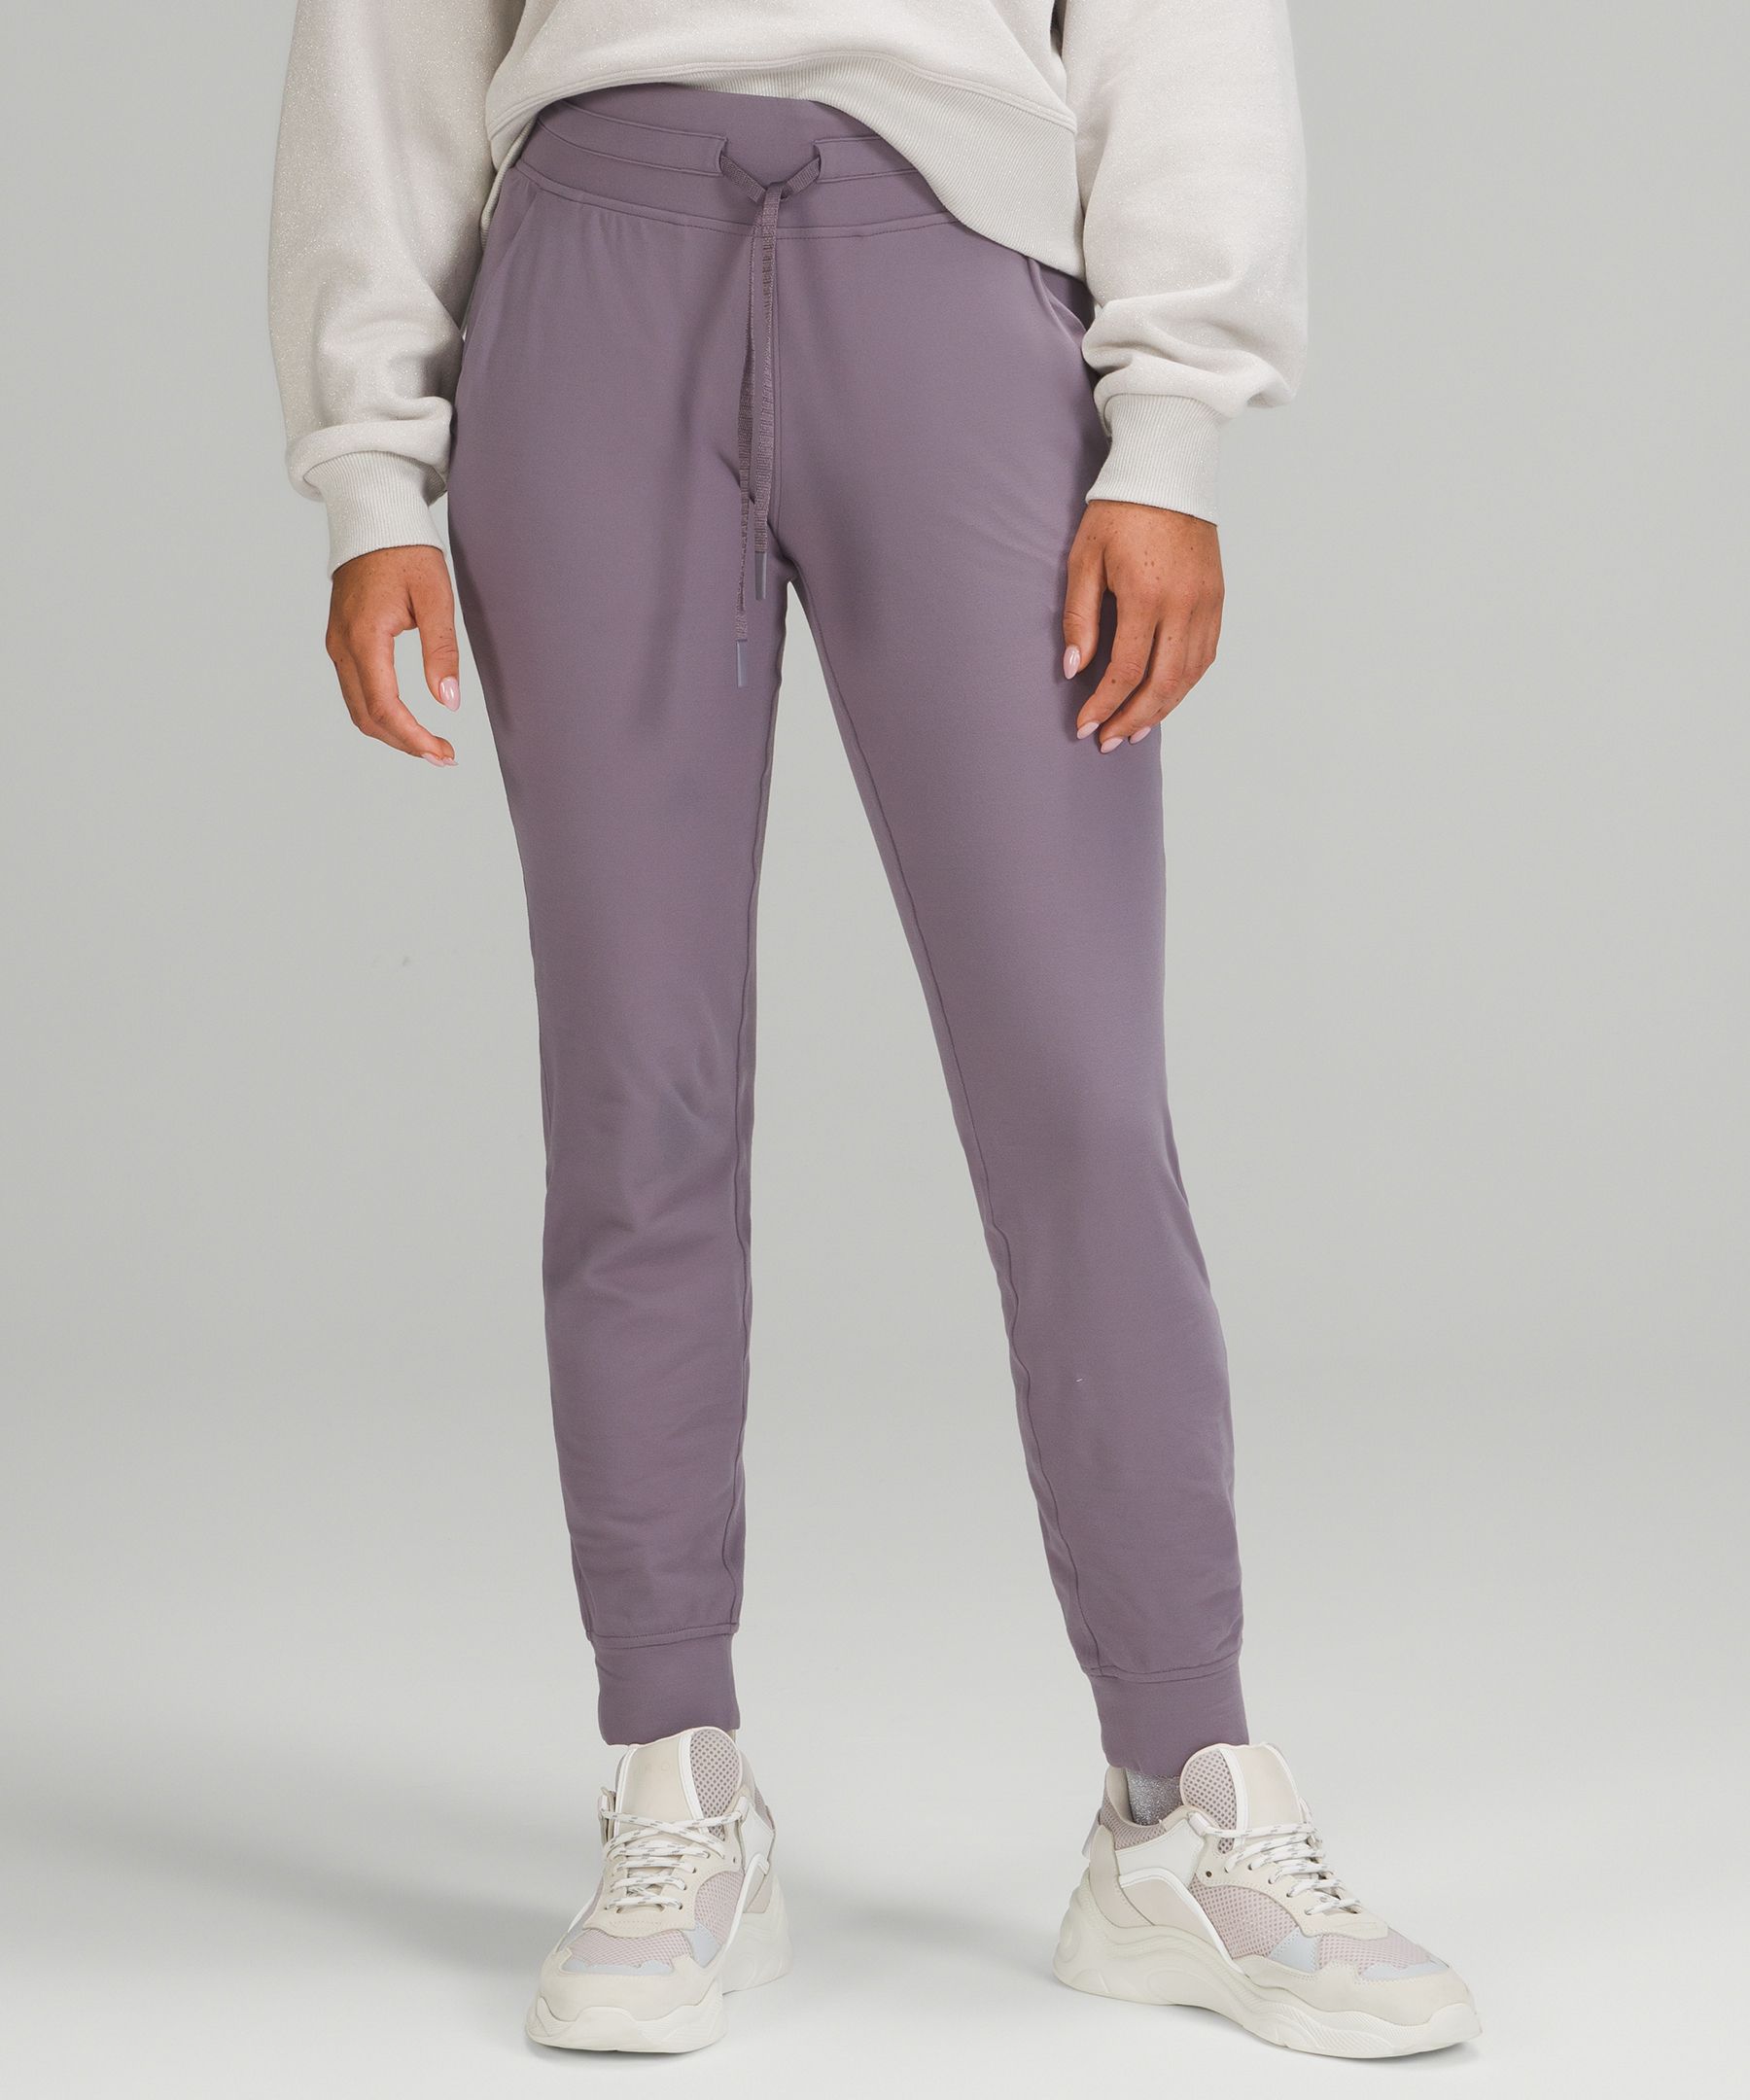 shop now for cheap Ready To Rulu Pant Lululemoncheapest